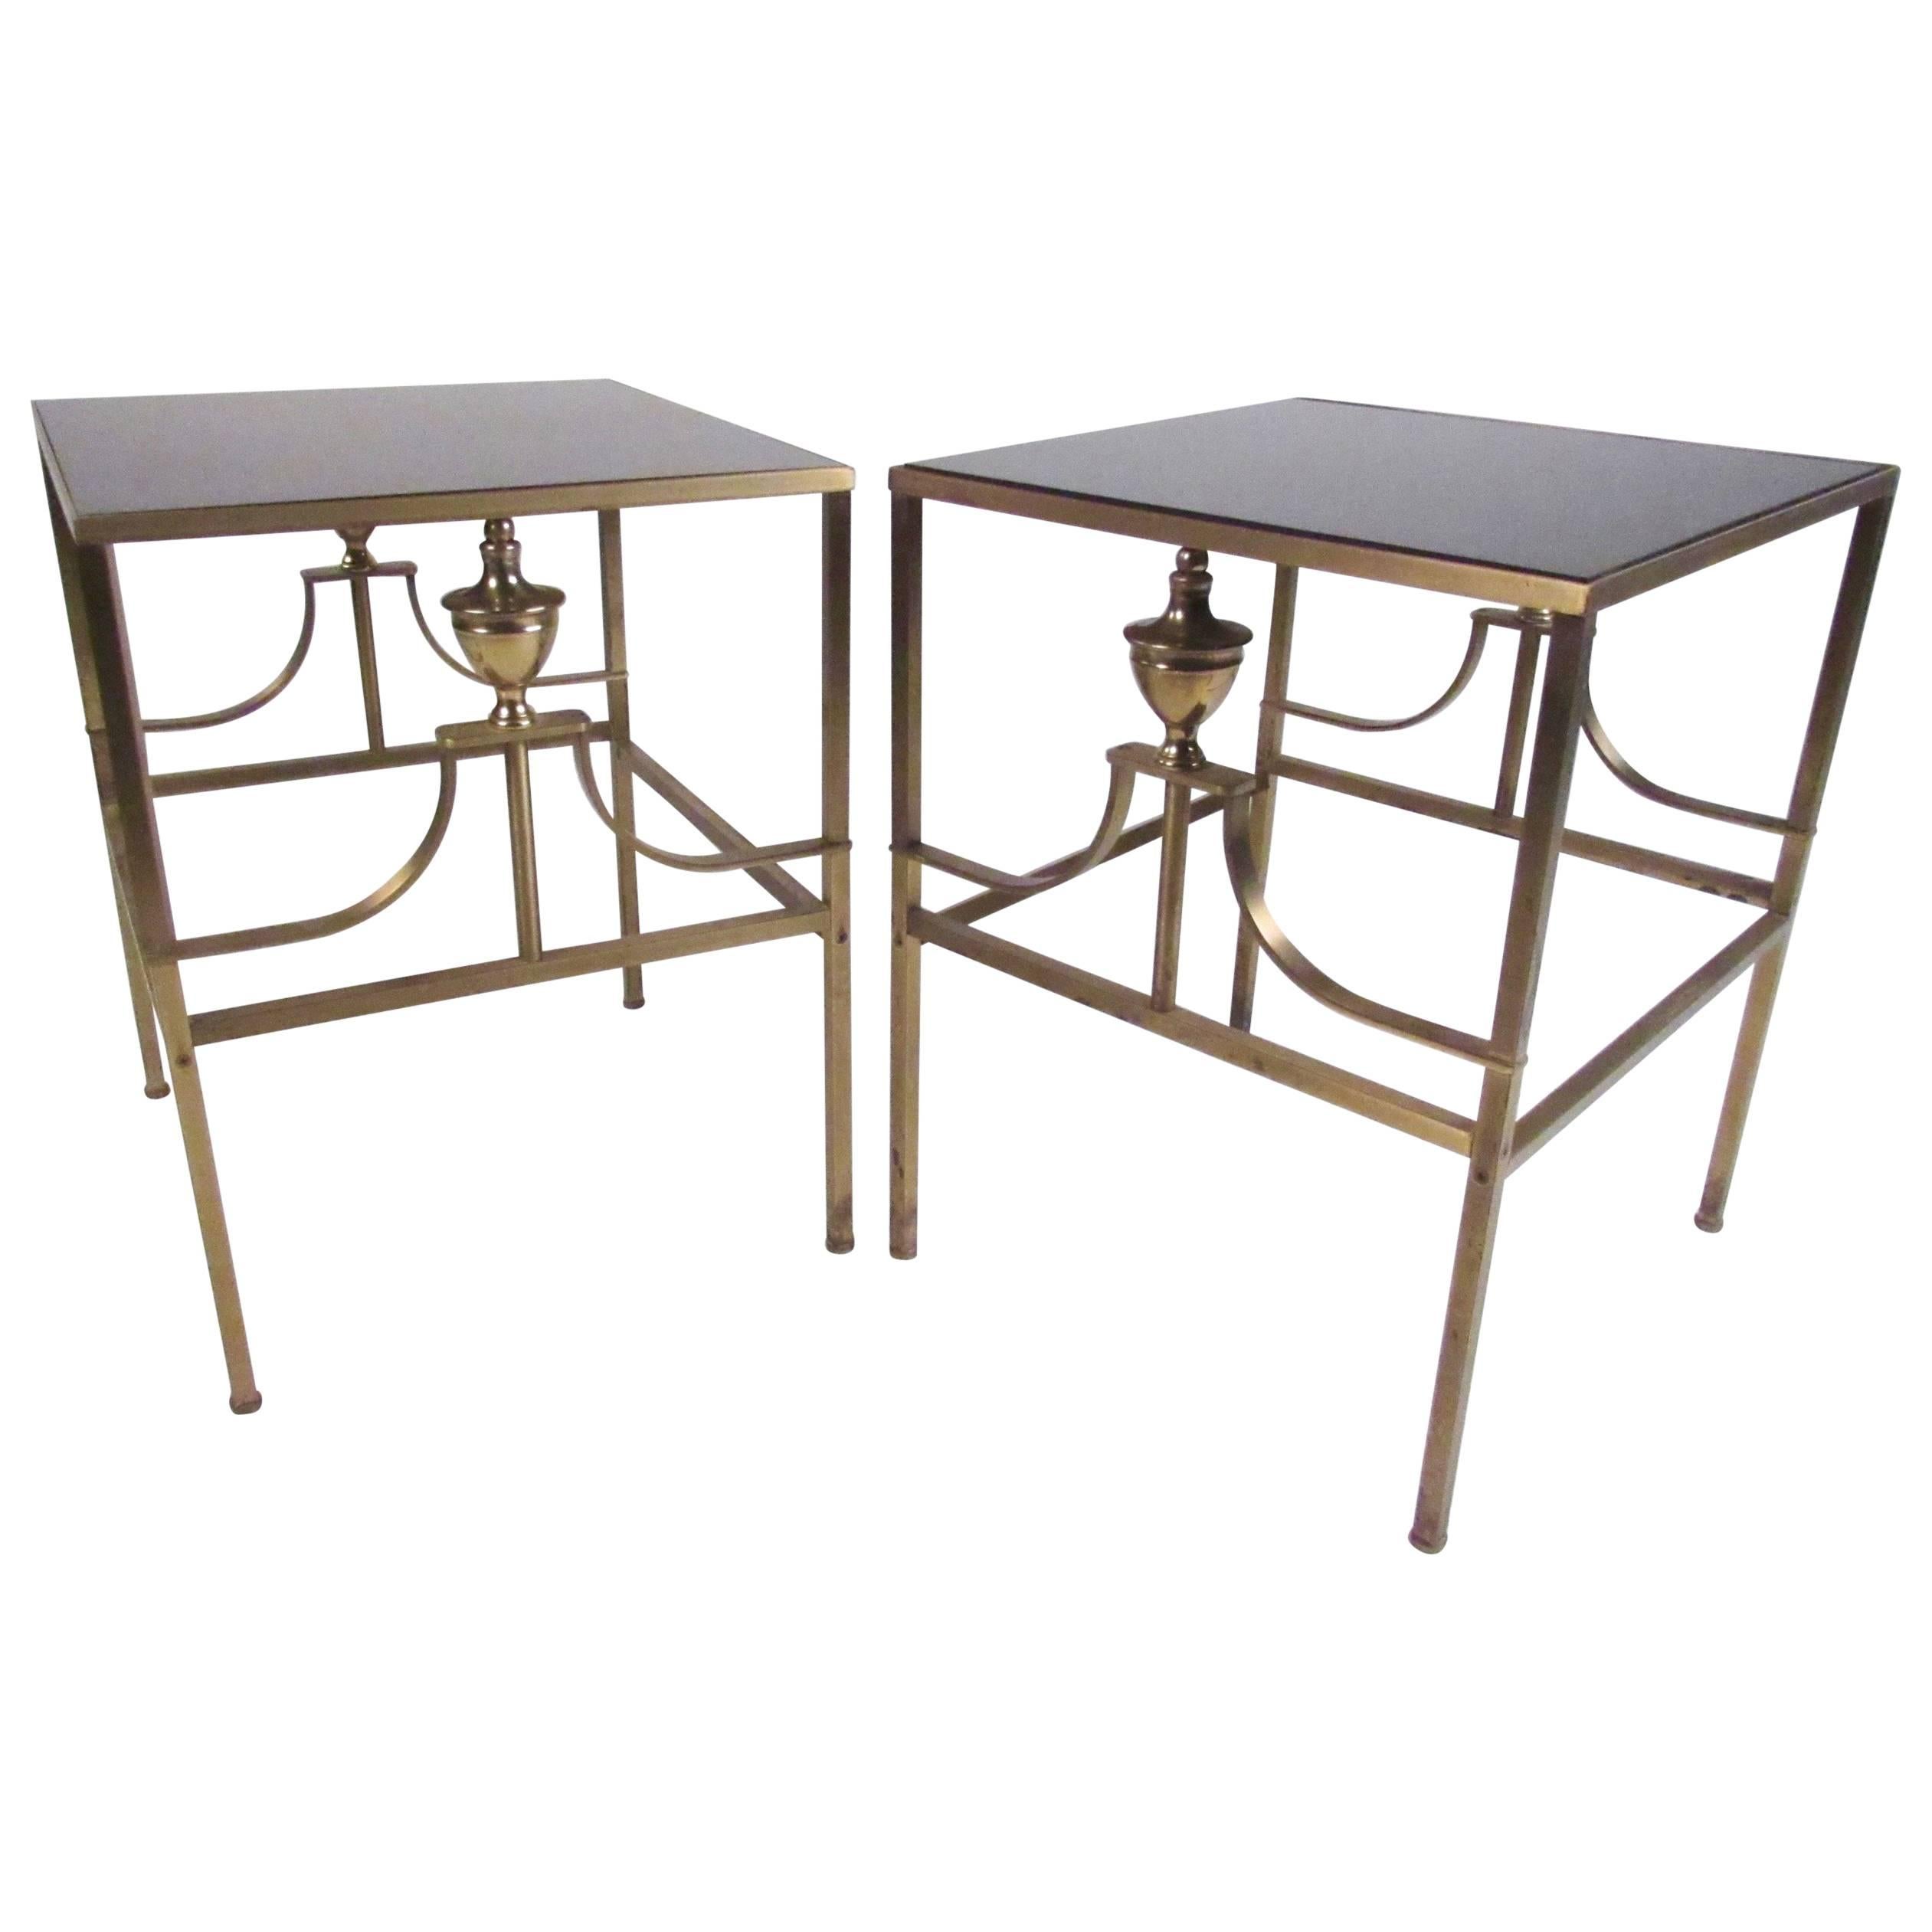 Pair of Elegant Brass and Glass Top End Tables